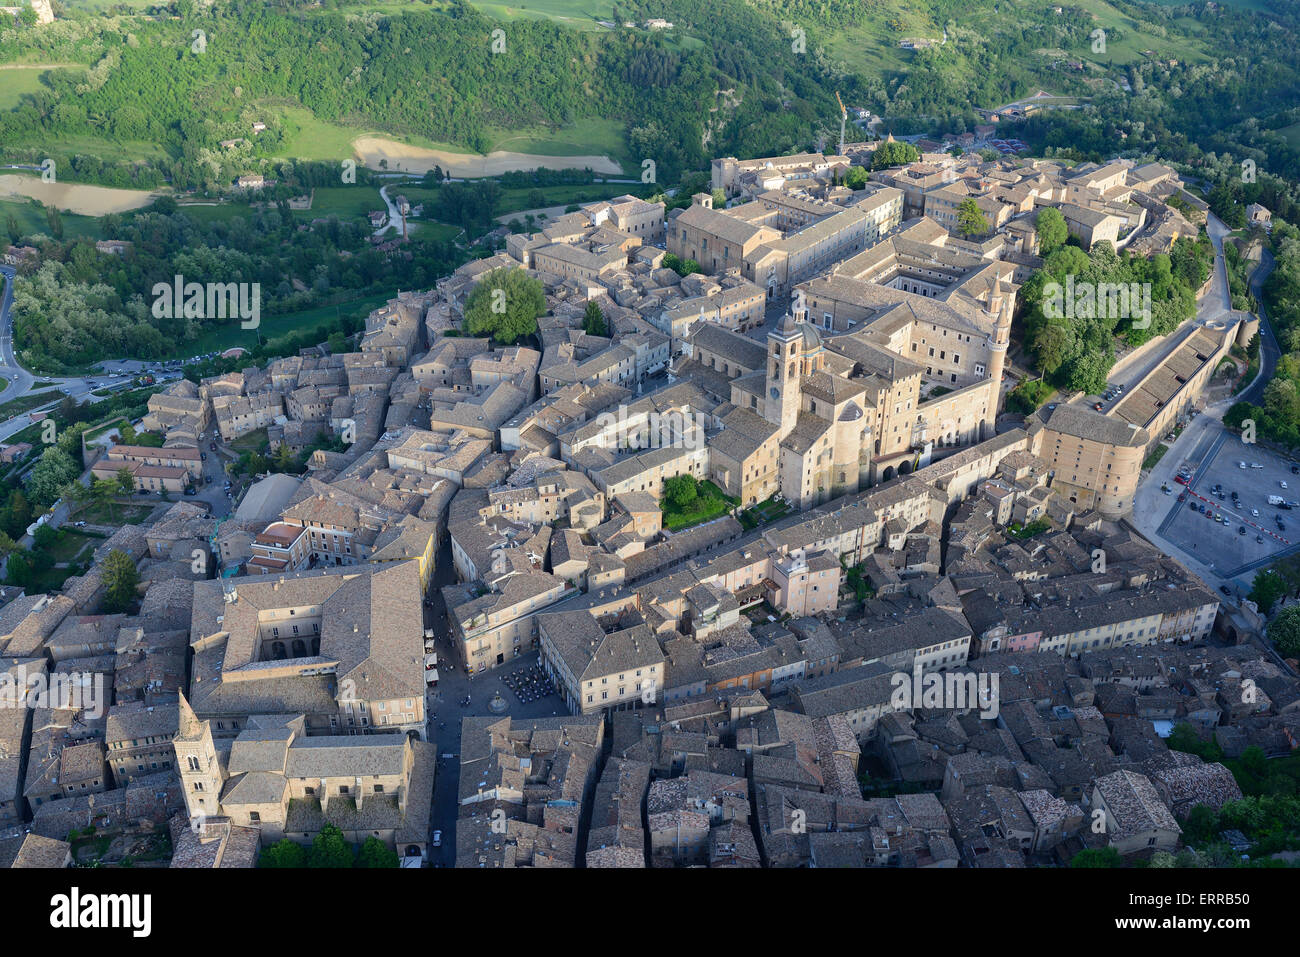 AERIAL VIEW. Picturesque medieval town listed as a UNESCO World Heritage Site. Urbino, Province of Pesaro and Urbino, Marche, Italy. Stock Photo